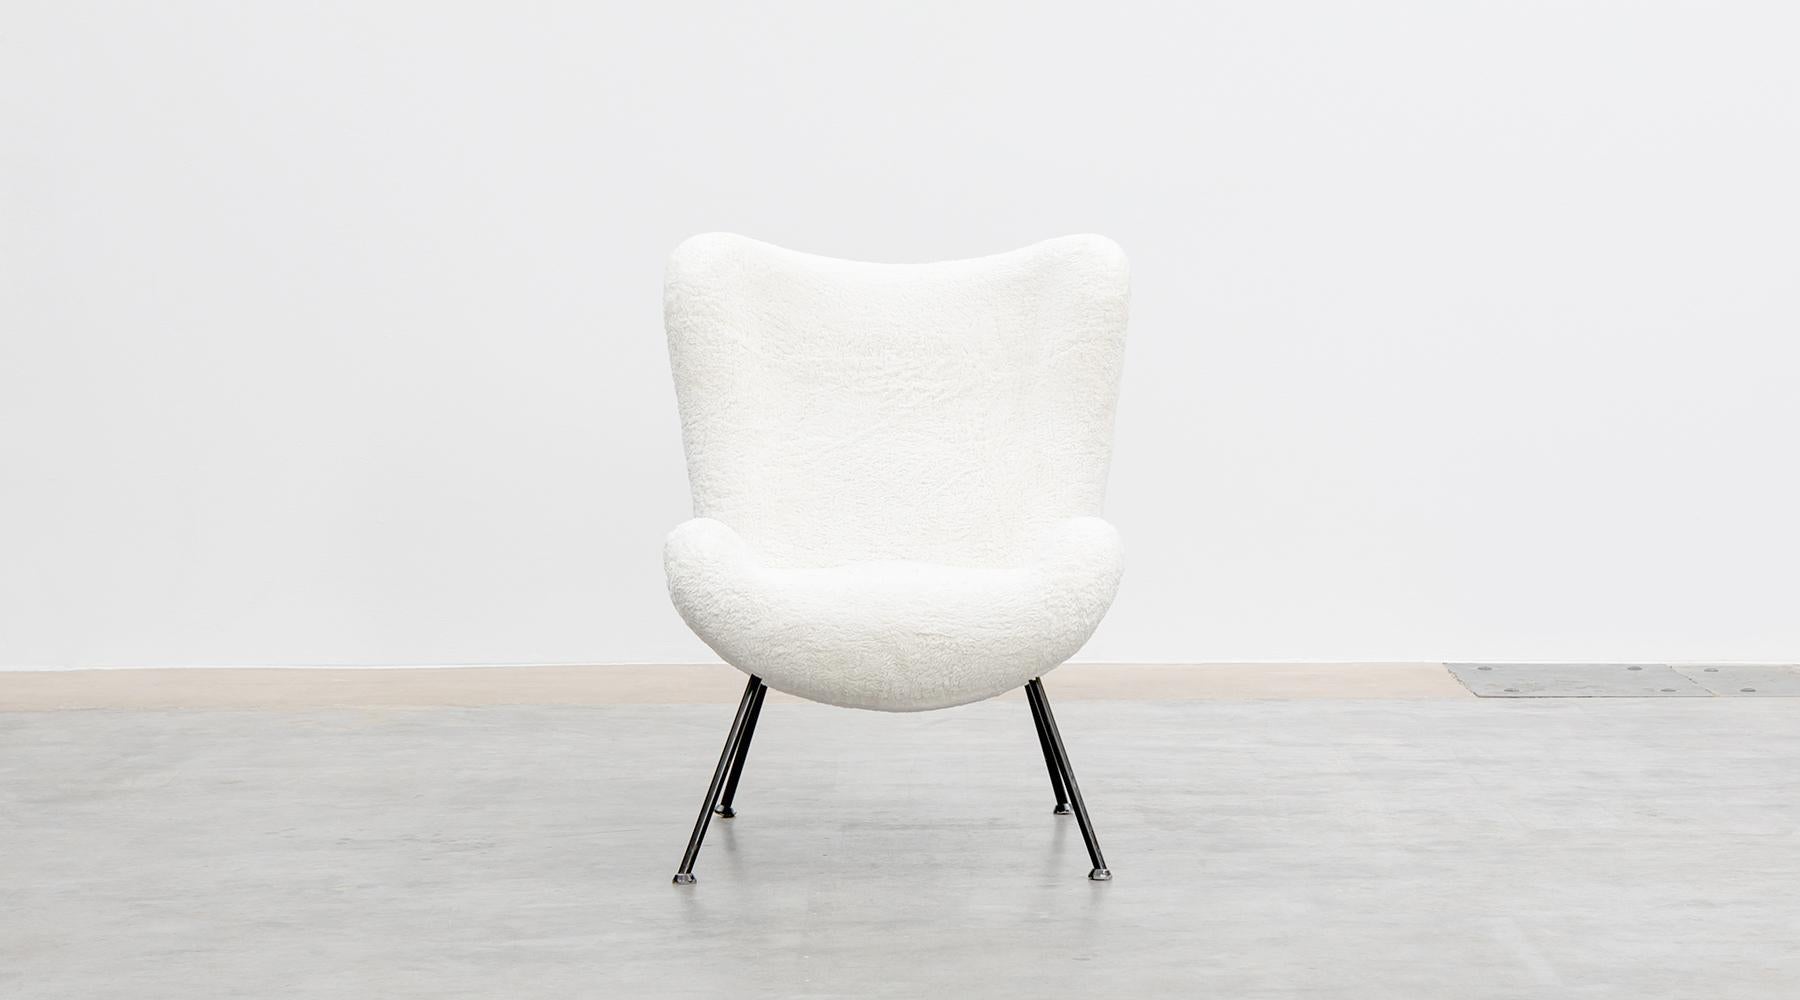 Lounge chair, white faux fur, metal legs, Fritz Neth, Germany, 1955.

Unique lounge chair designed by German Fritz Neth in the 1950s. Organically shaped seat shell on black lacquered metal legs. These chairs are extremely comfortable and comes in